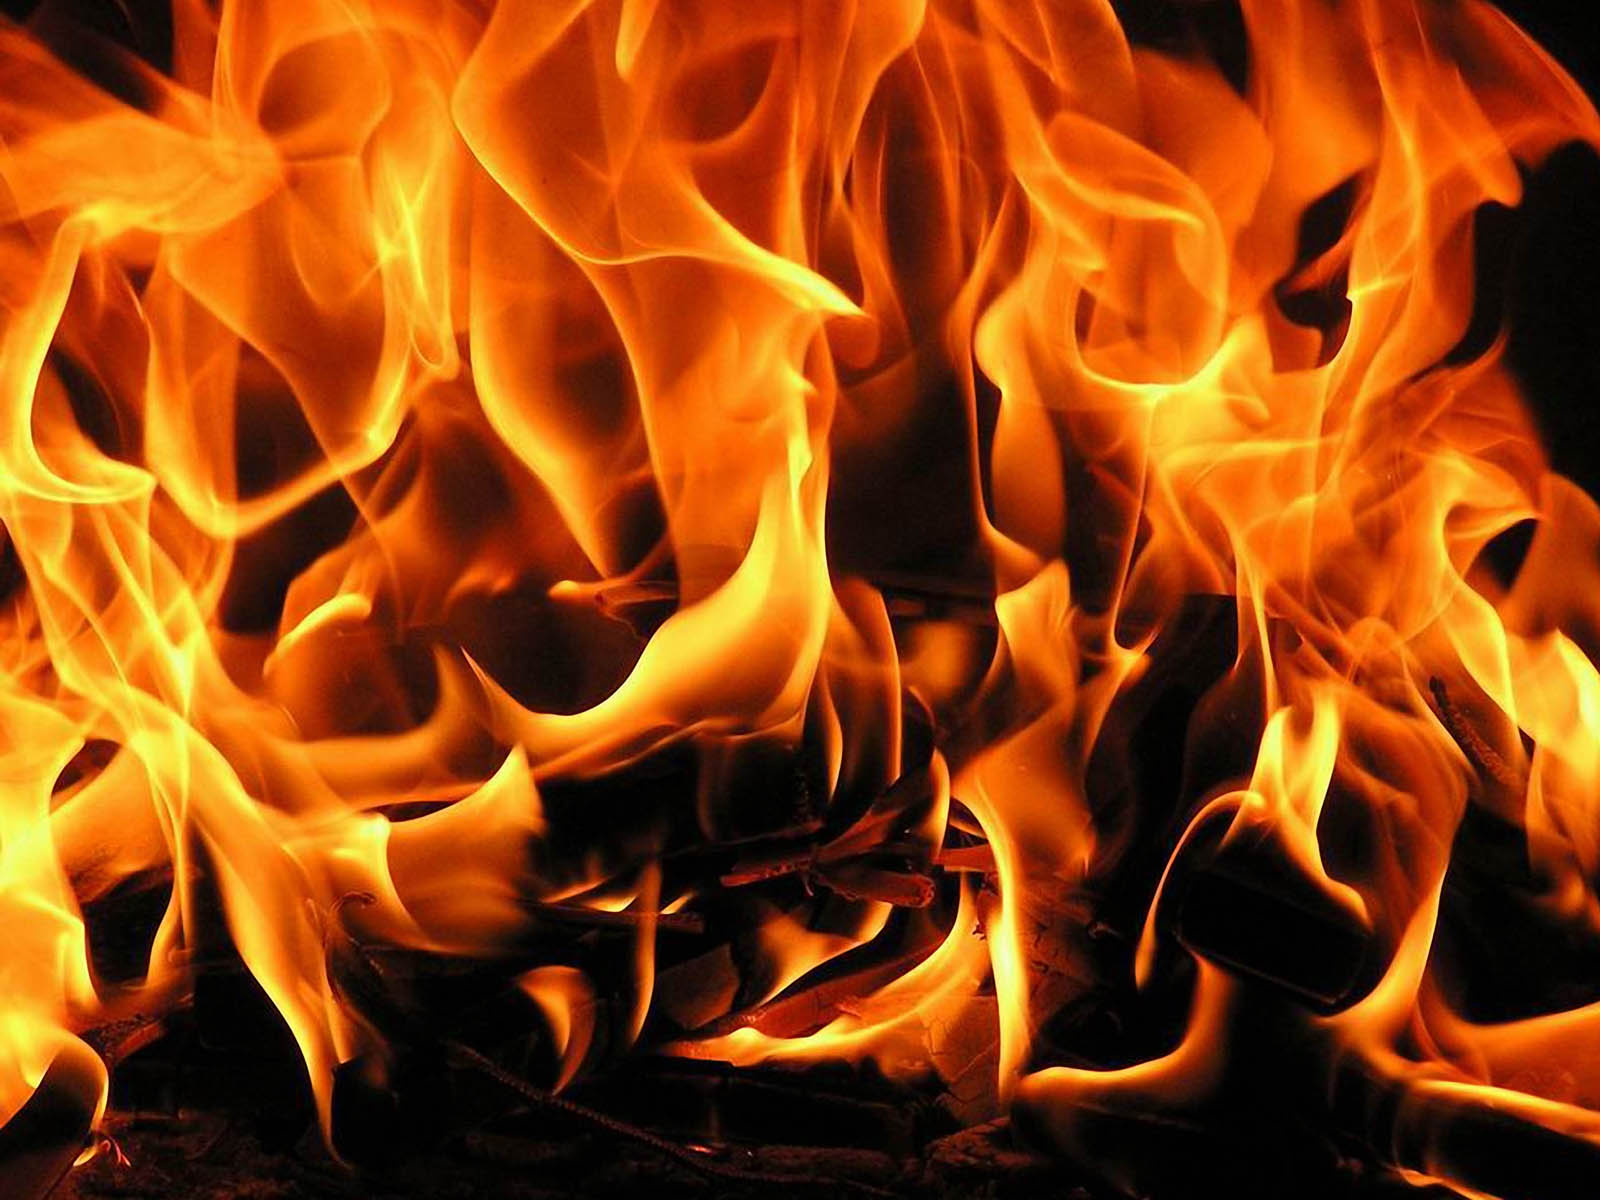  Flames Images Photos Pictures Wallpapers and Backgrounds for free